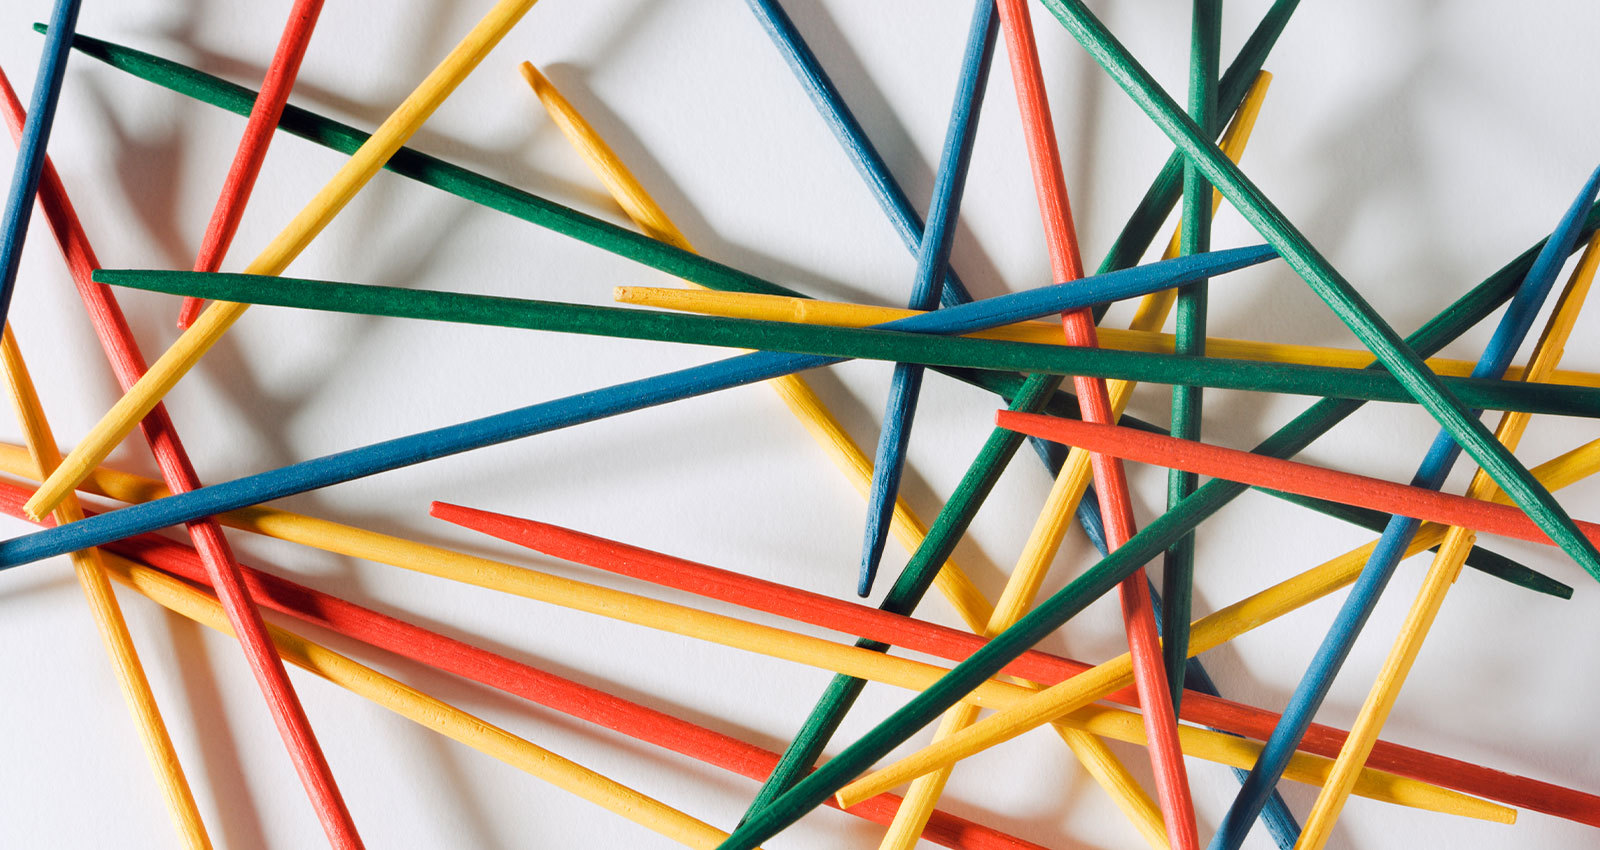 A close-up photo of brightly colors Pick Up Stix stacked and intersecting representing the holistic approach to social work.